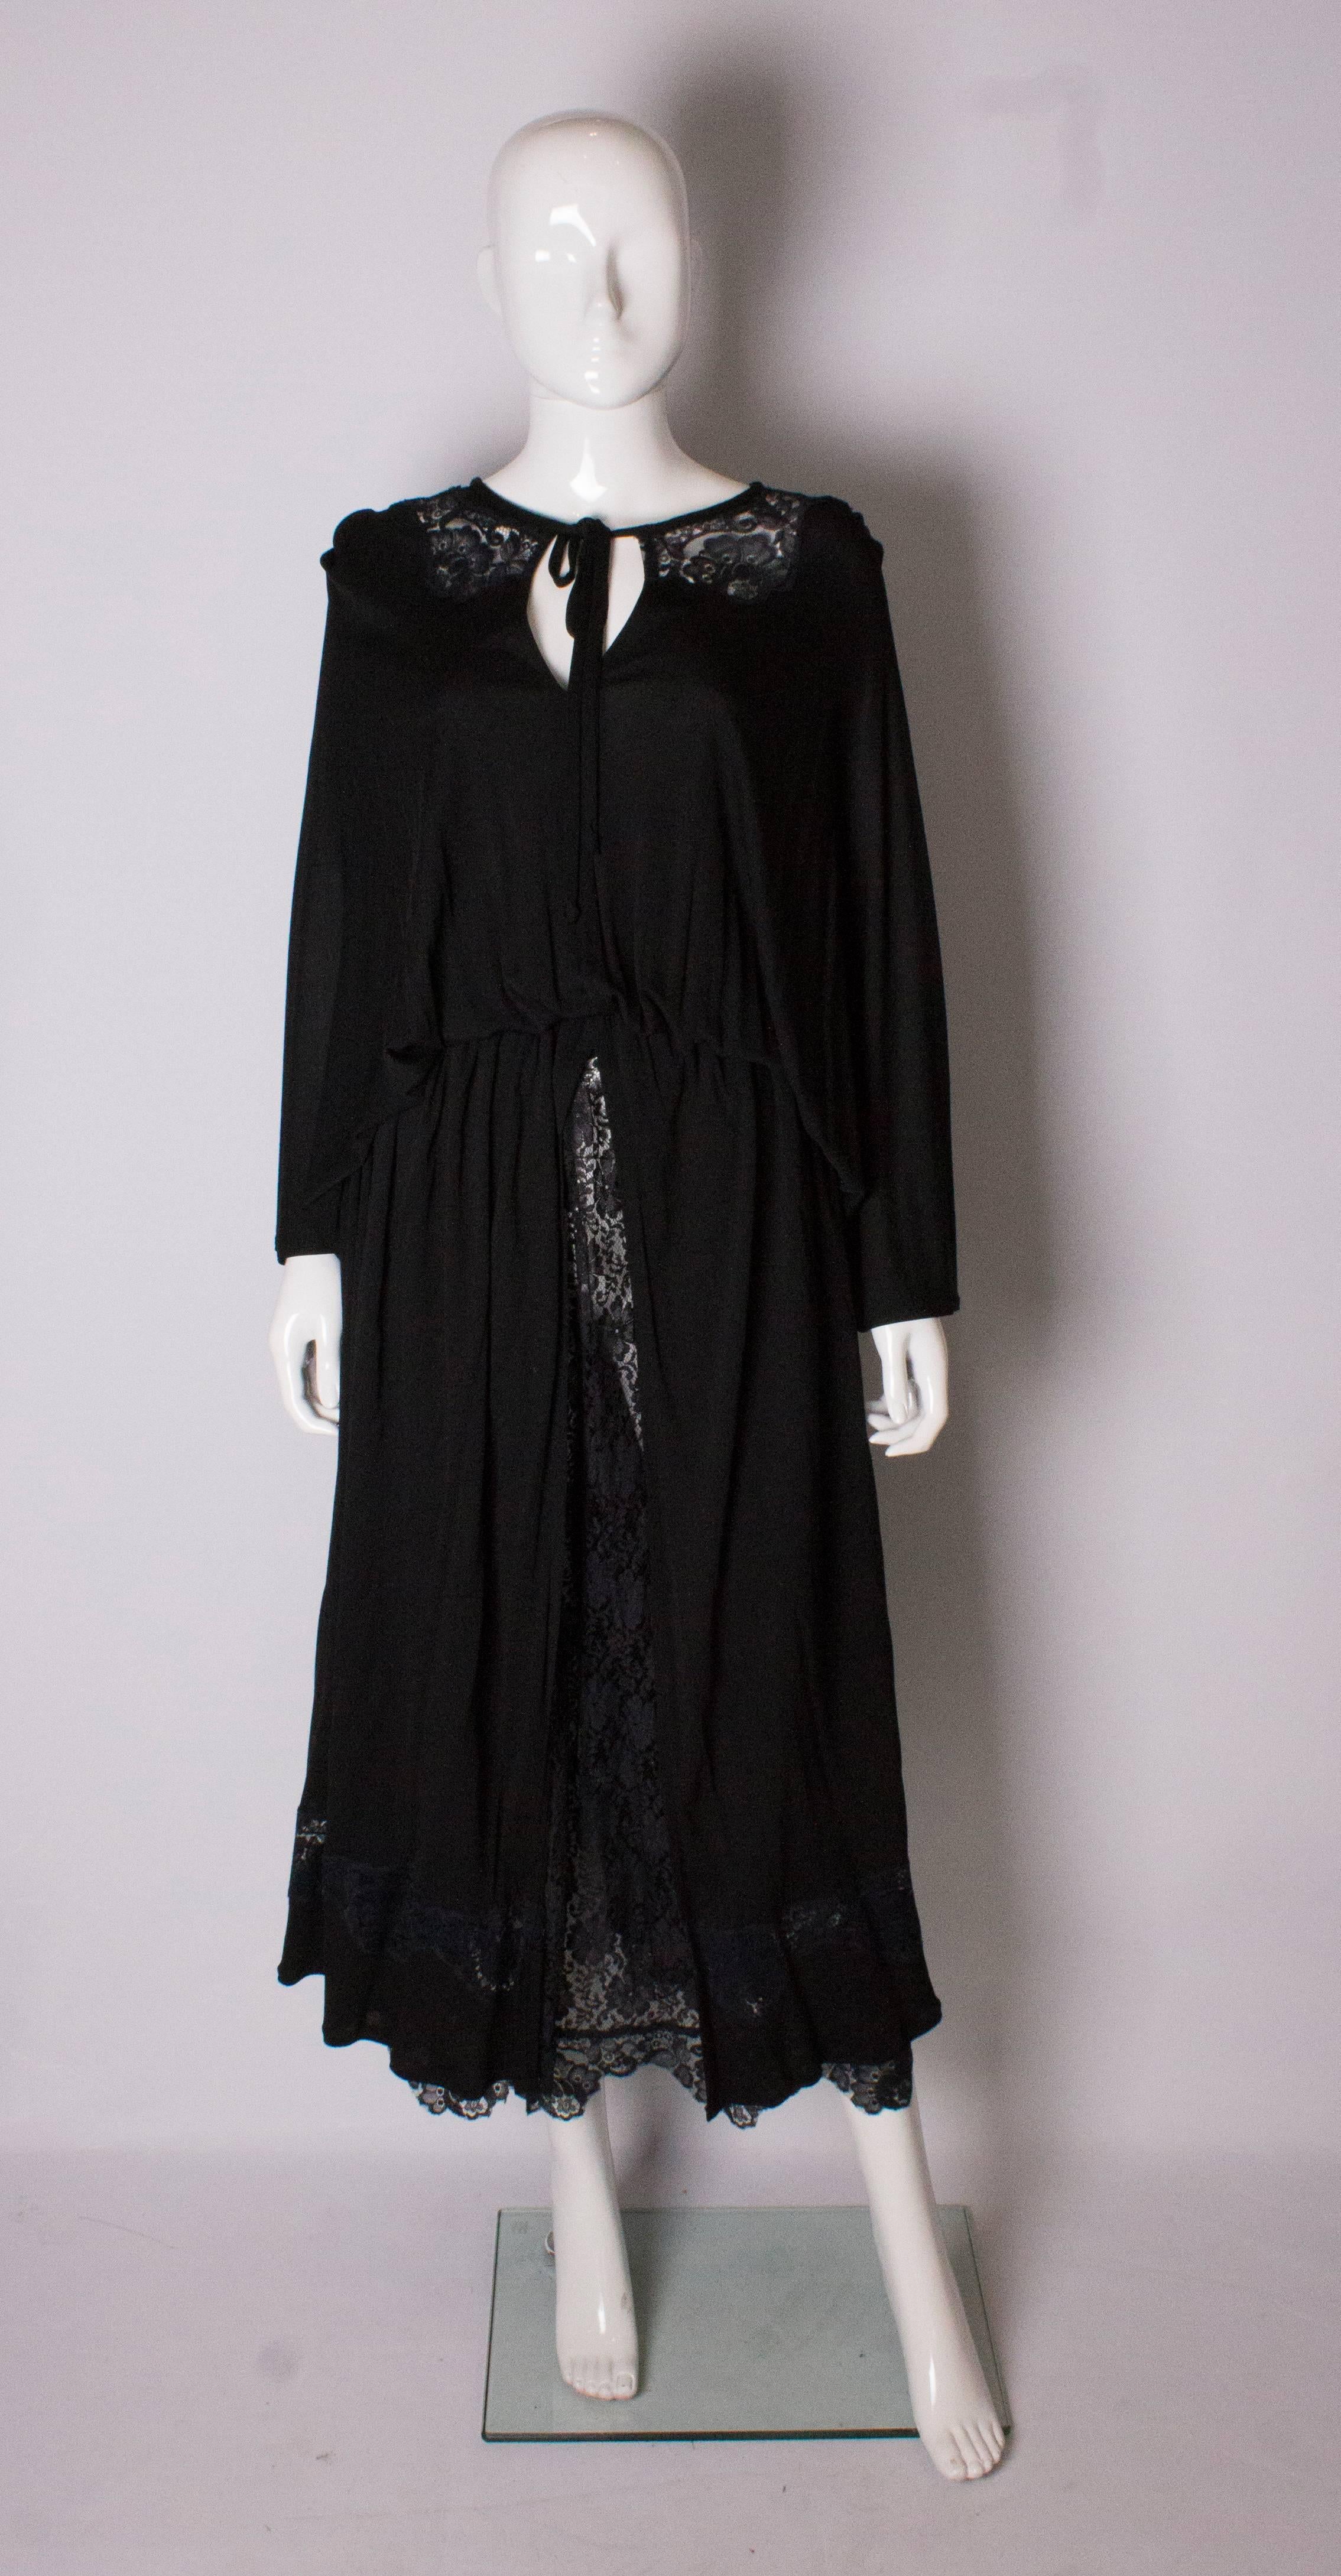 A vintage evening dress by Quorum. The black vintage dress has a lace collar and skirt , with a black split over skirt. There is a row of lace at the hem.